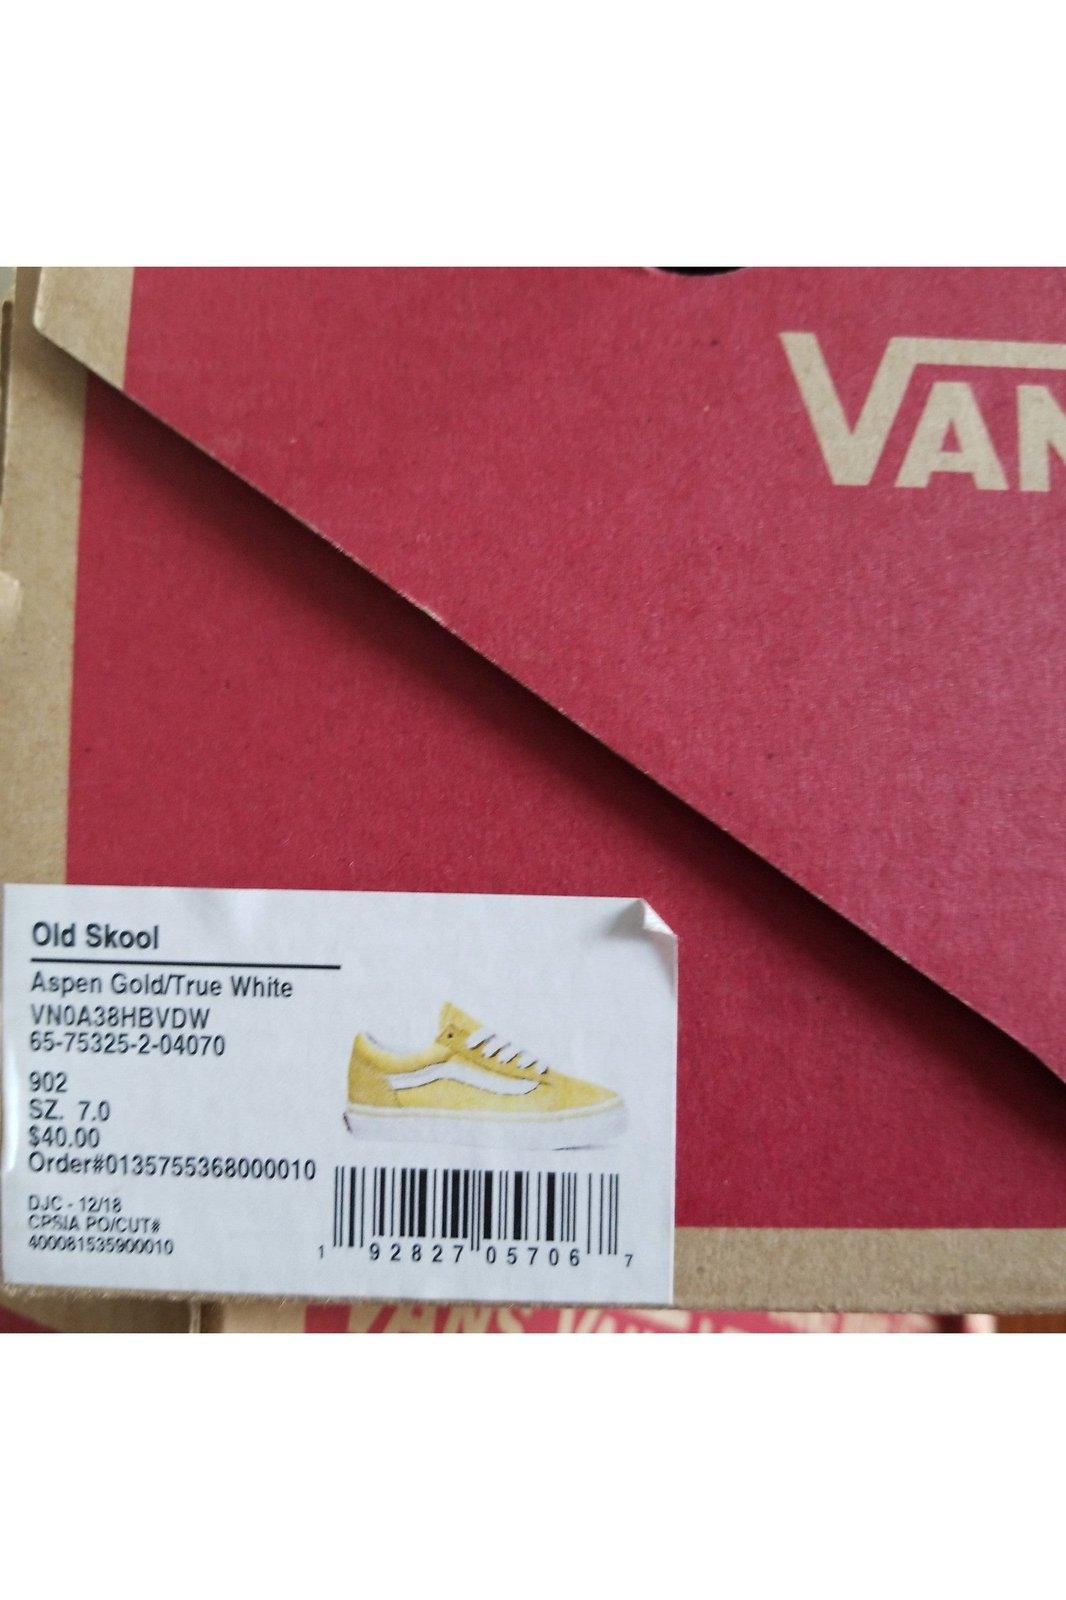 Vans gold and white sneakers, youth sz 7